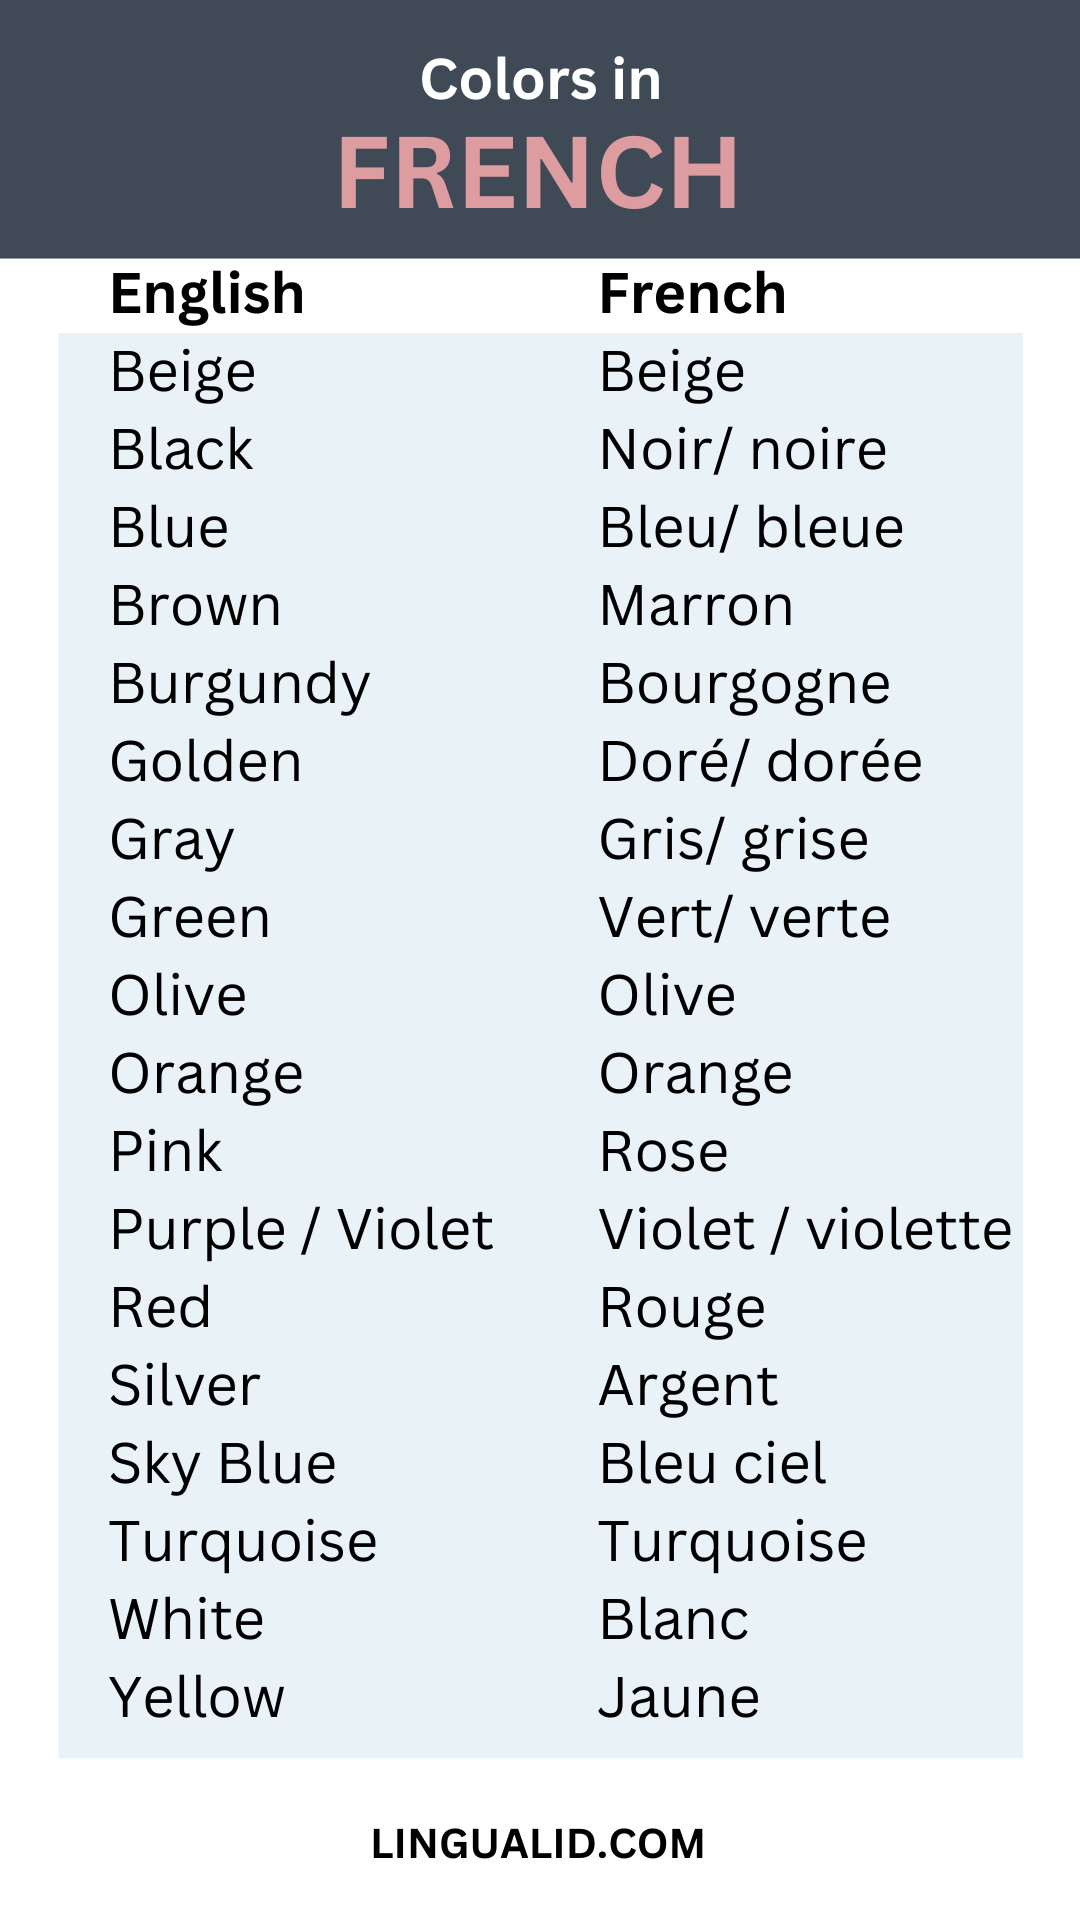 Colors in French visual